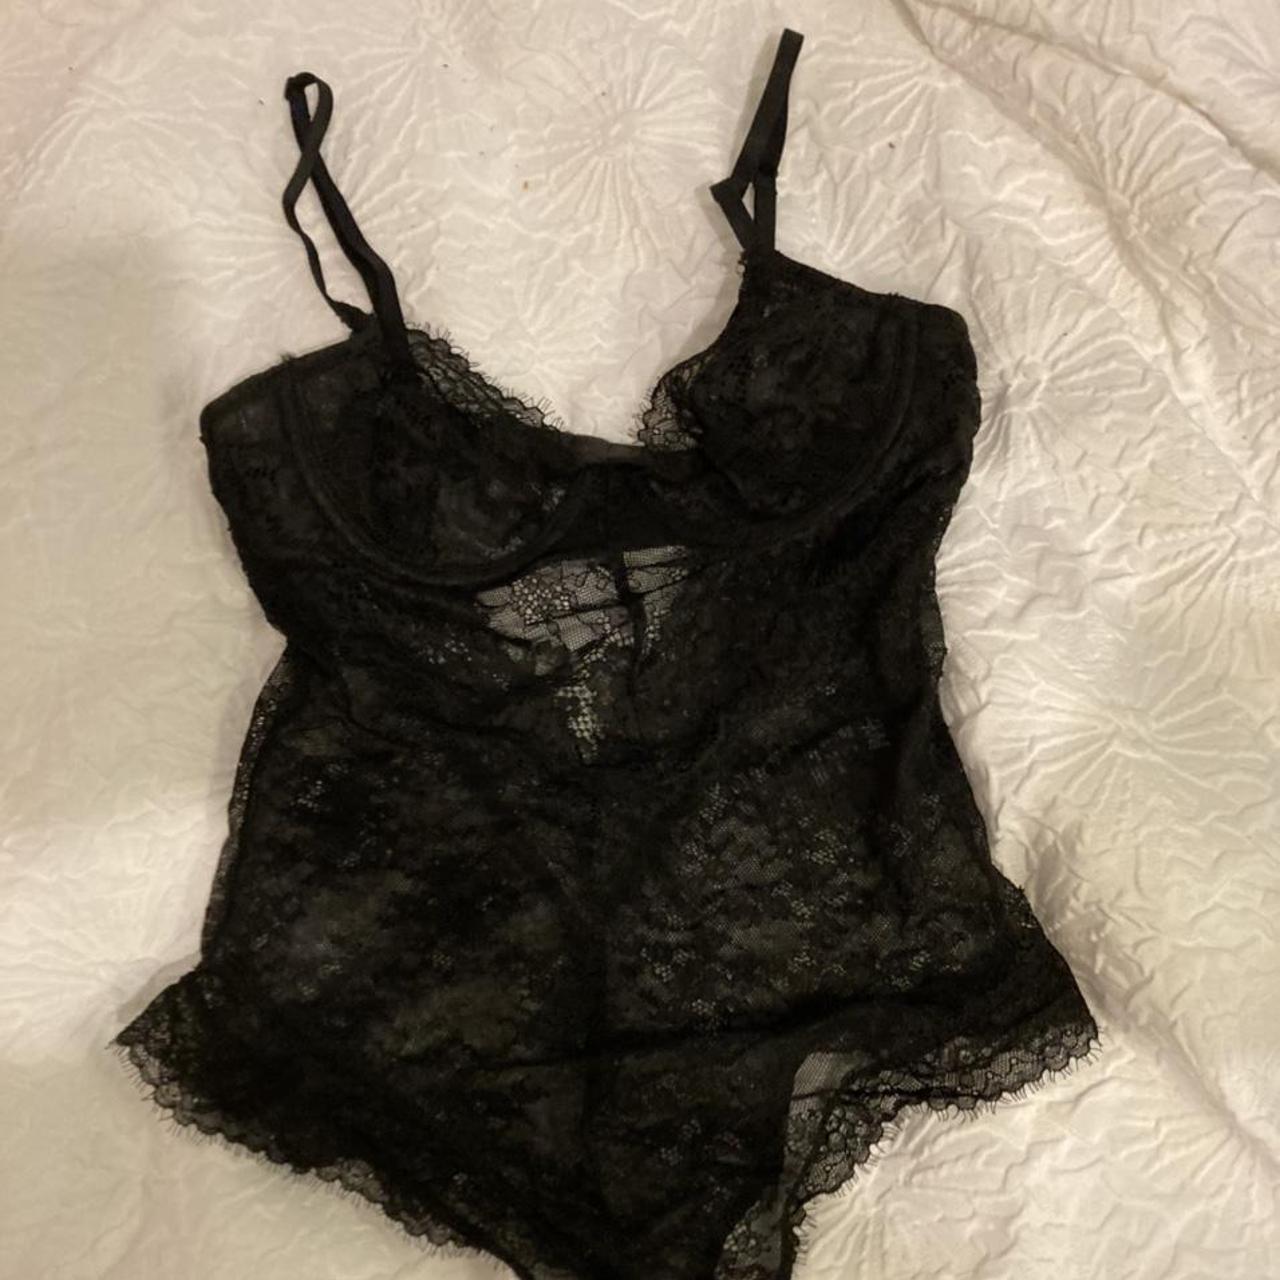 Black lace body suit Never worn So cute and... - Depop